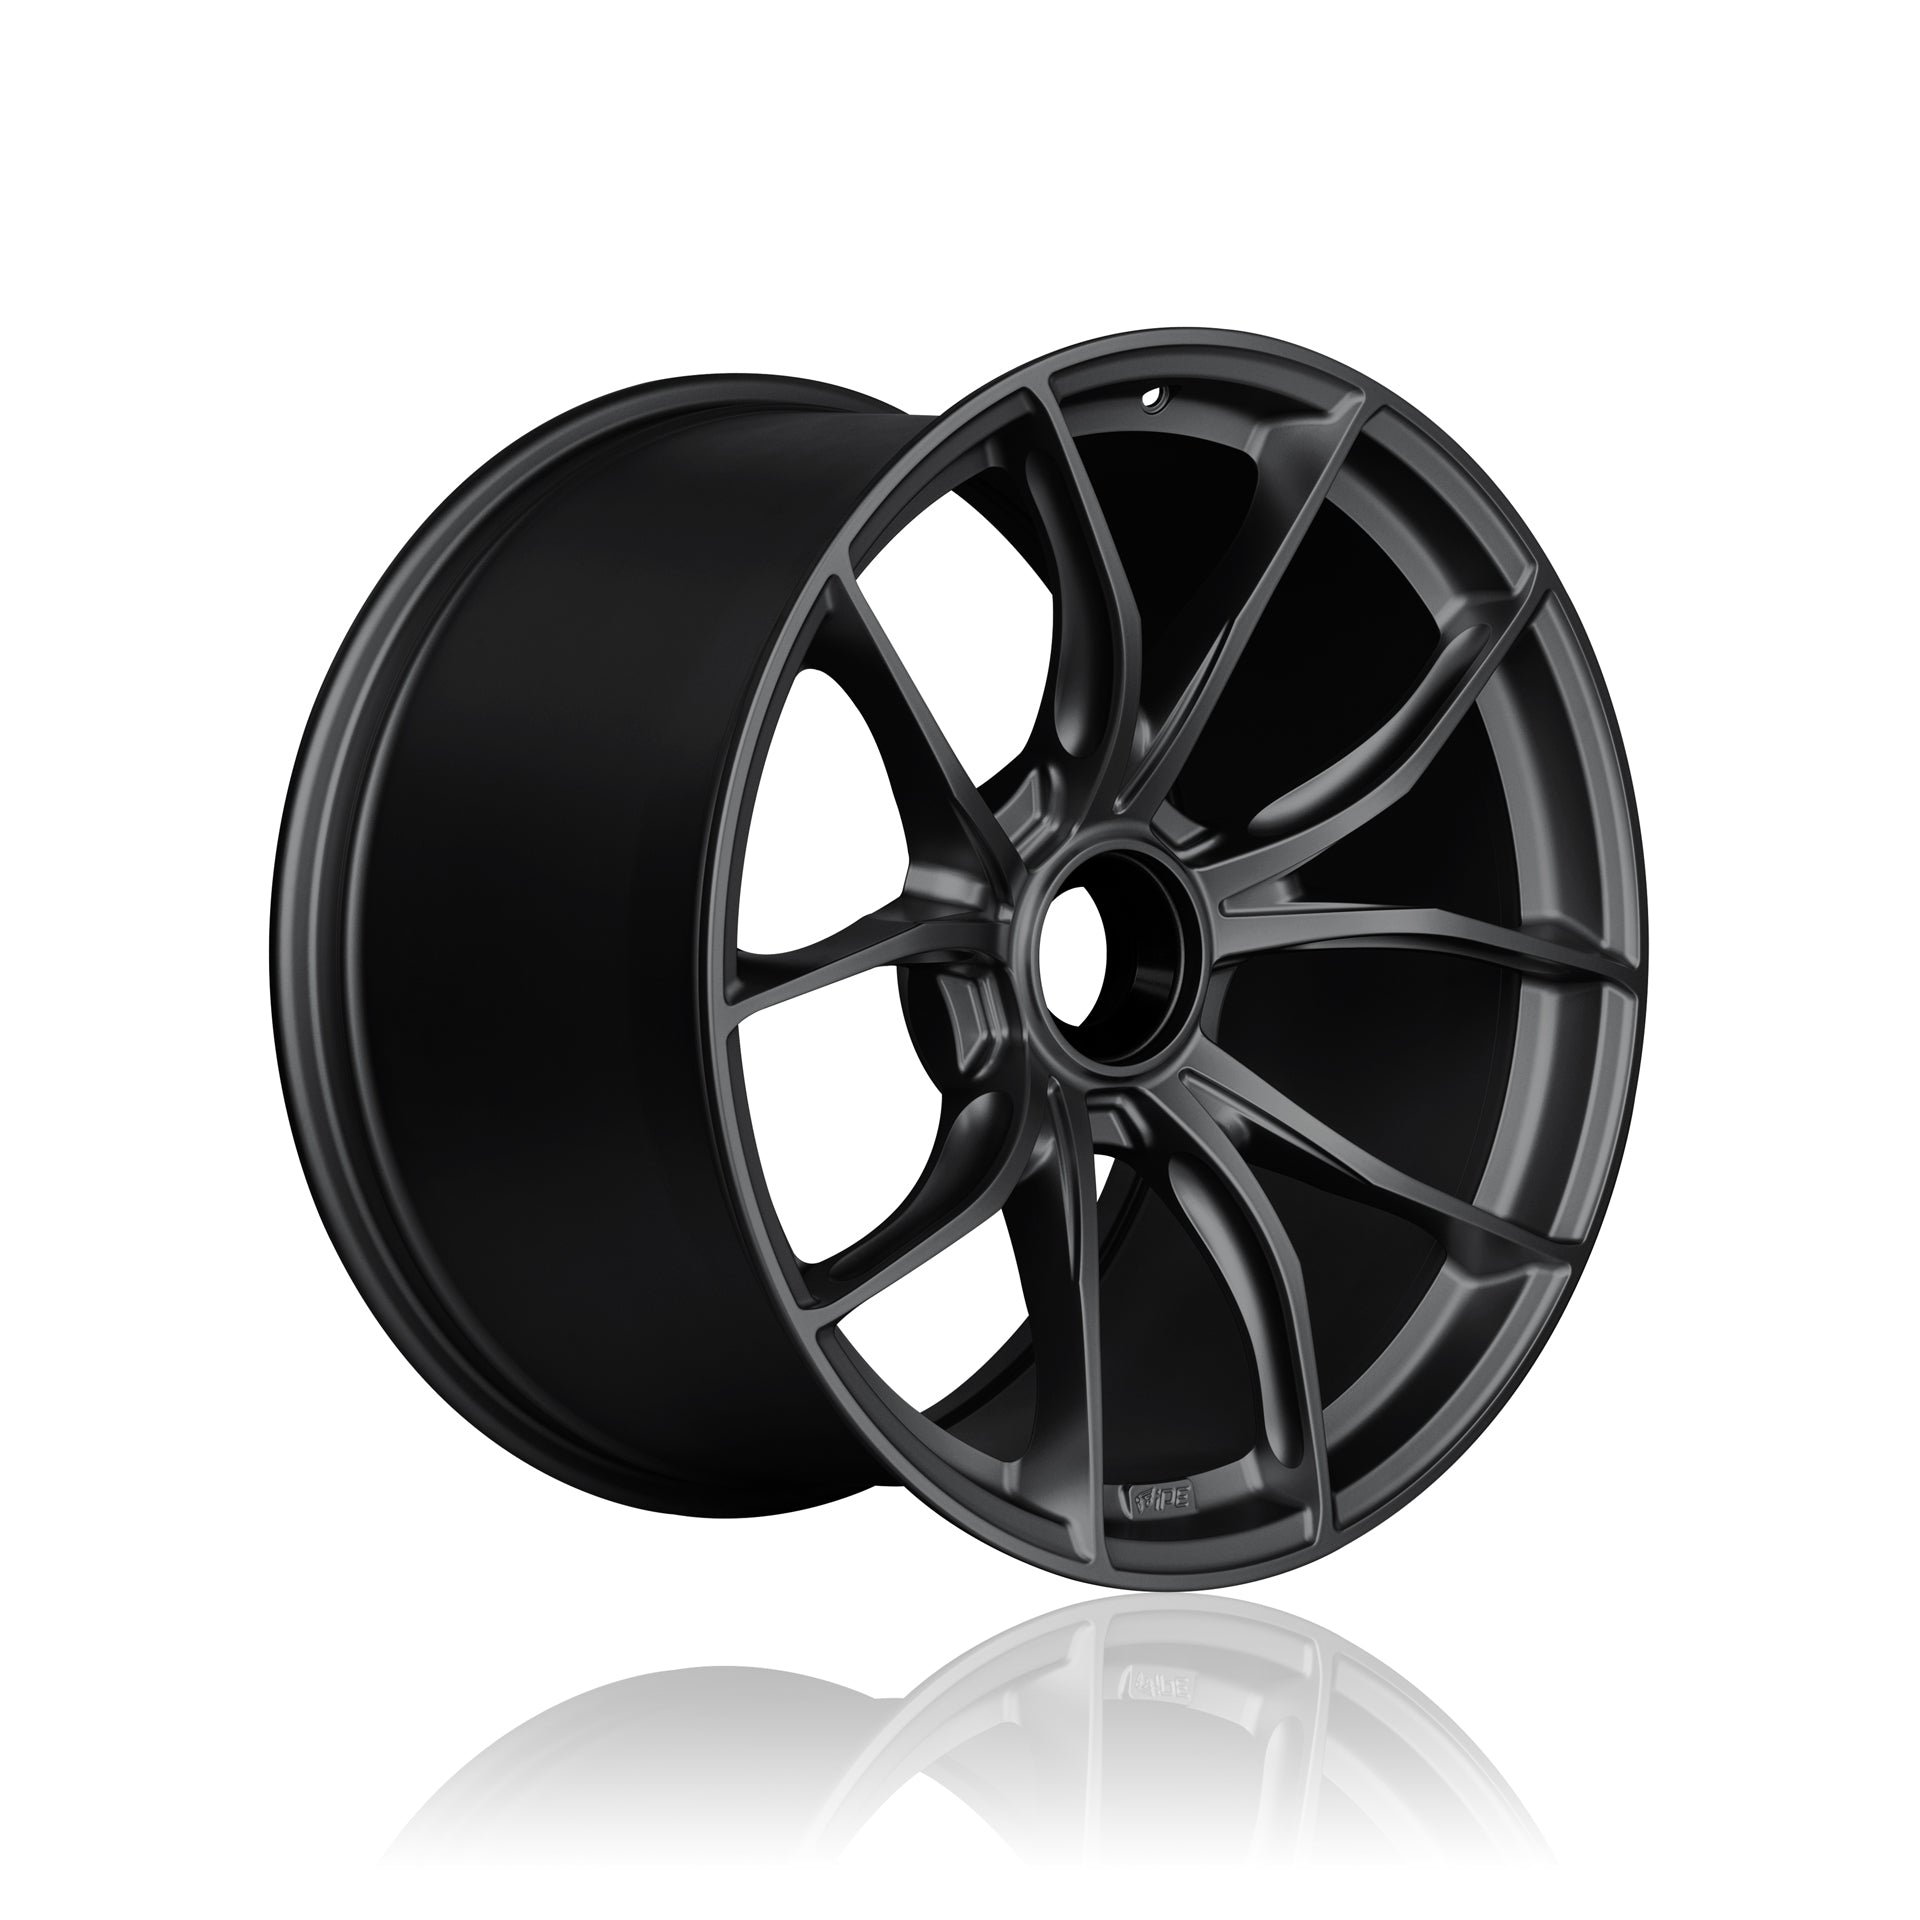 Offset front view of a black IPE MFR-01 Magnesium wheel on a white background